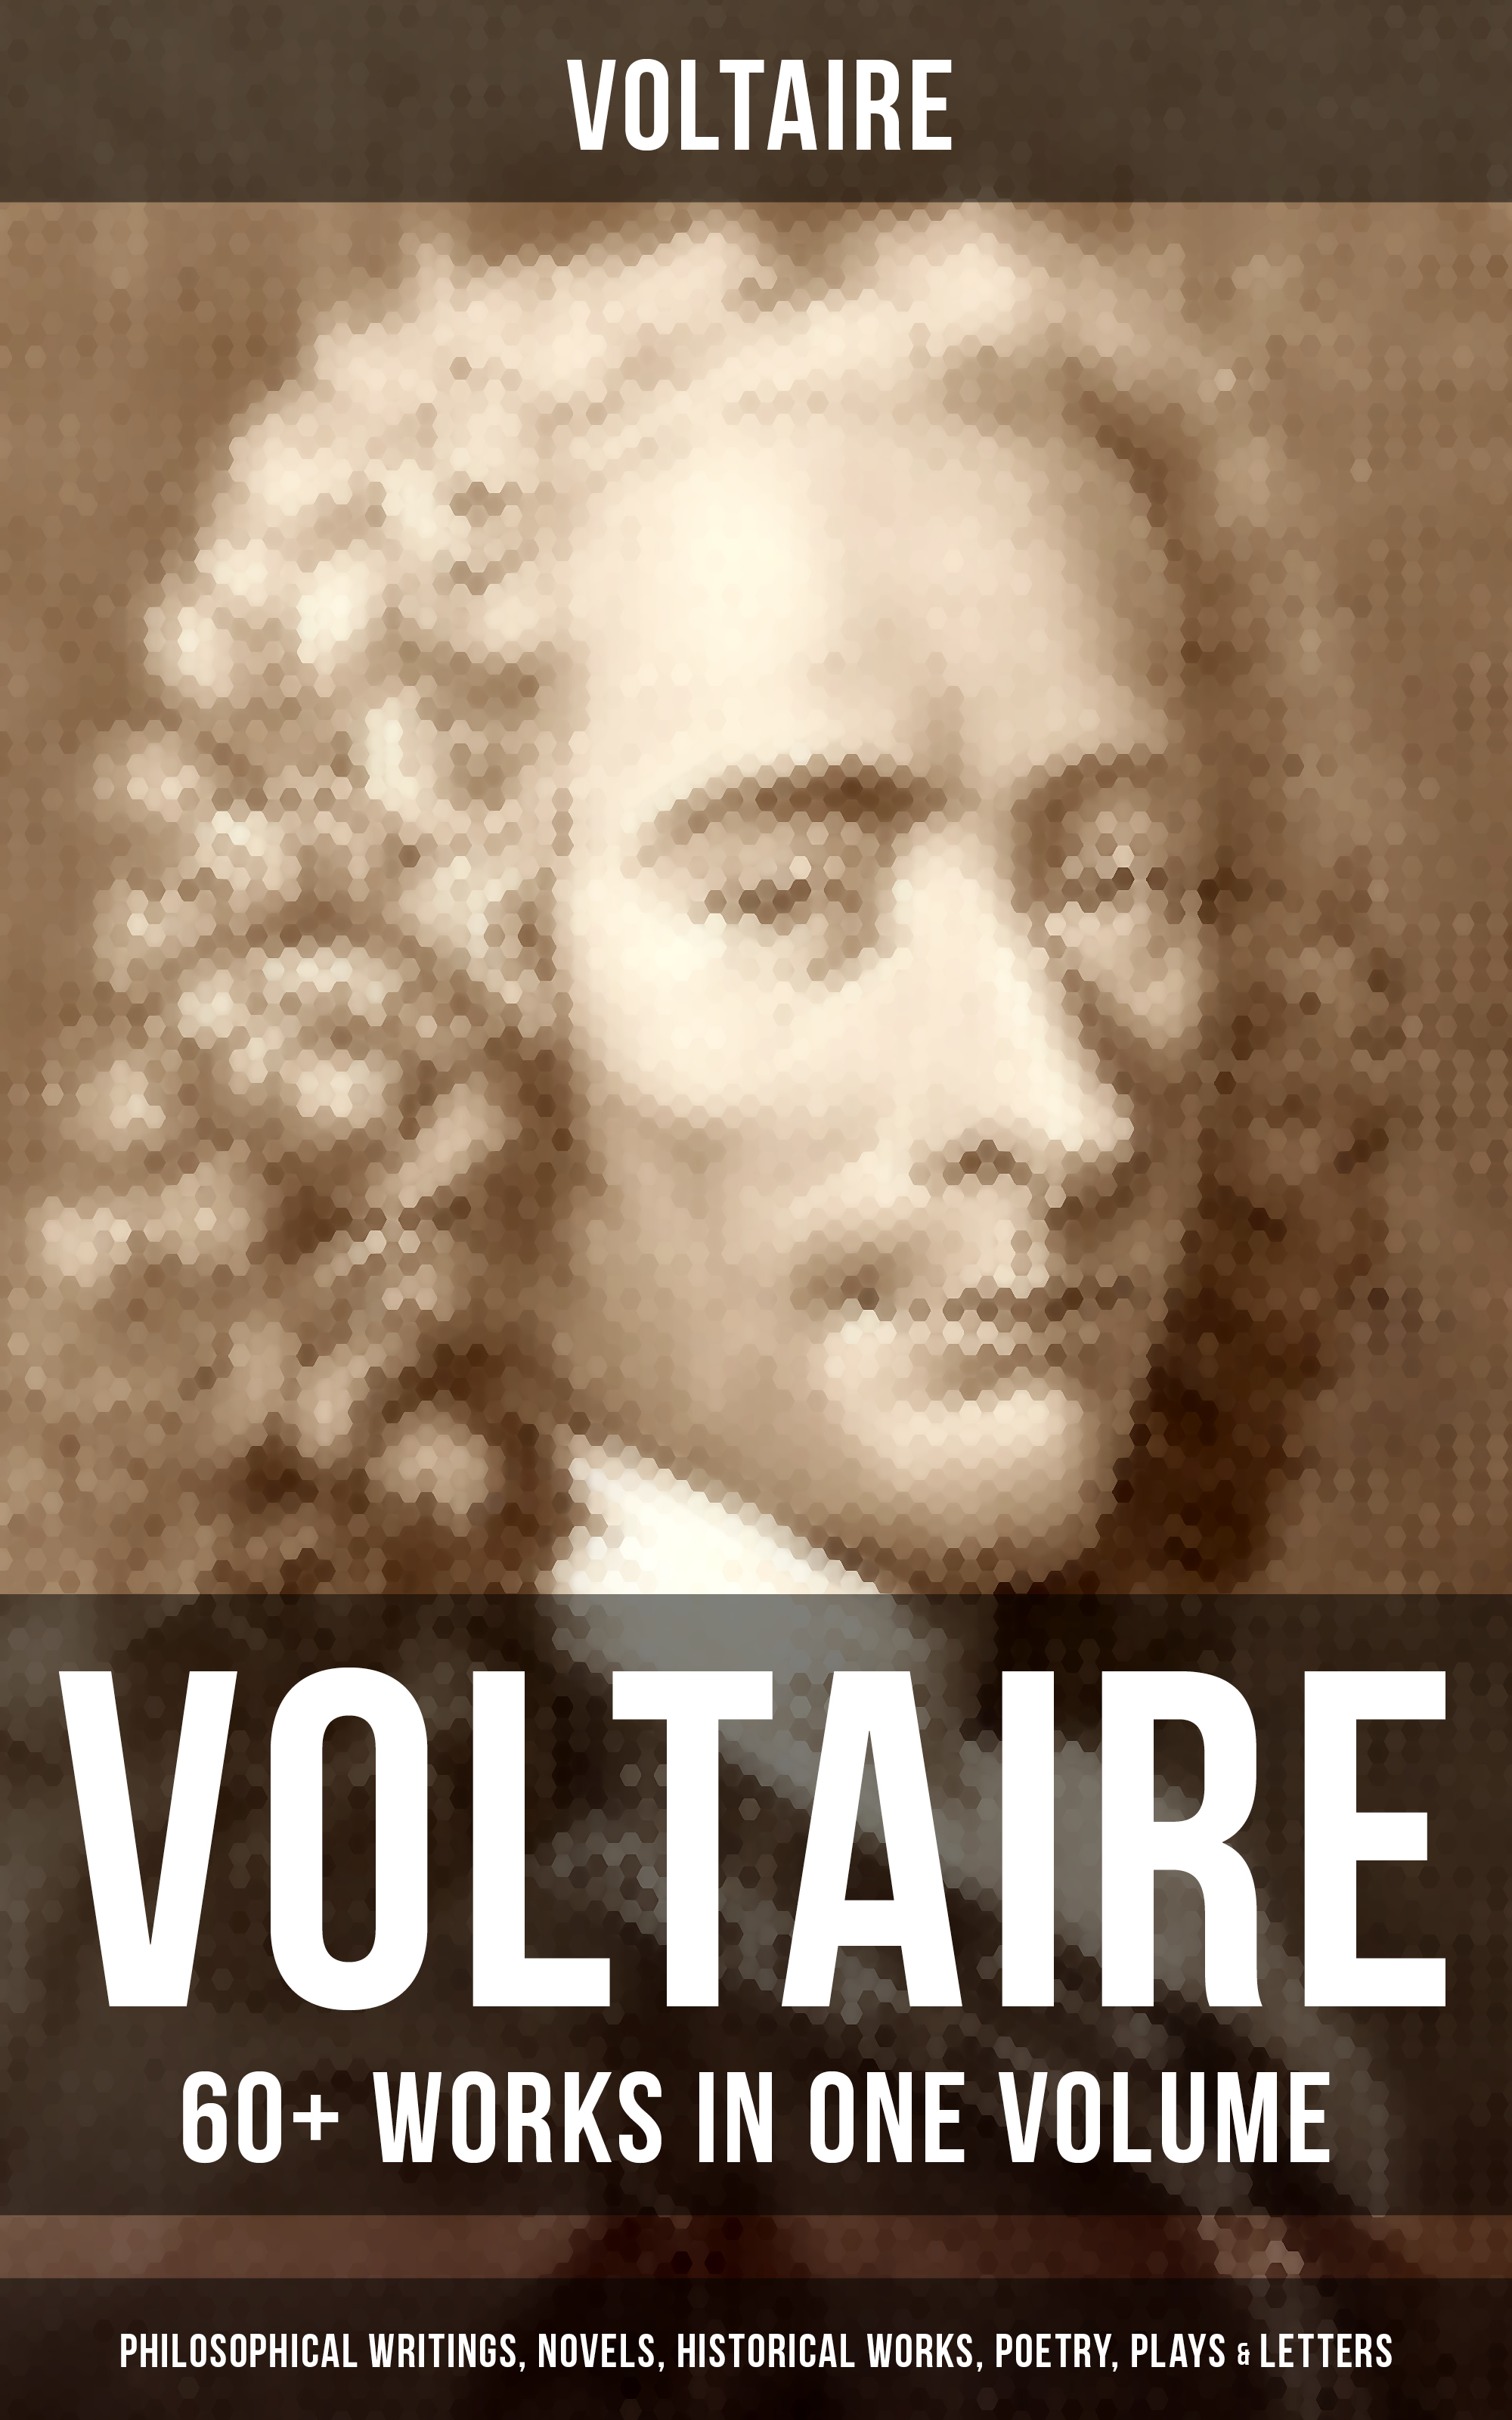 Скачать VOLTAIRE: 60+ Works in One Volume - Philosophical Writings, Novels, Historical Works, Poetry, Plays & Letters - Вольтер